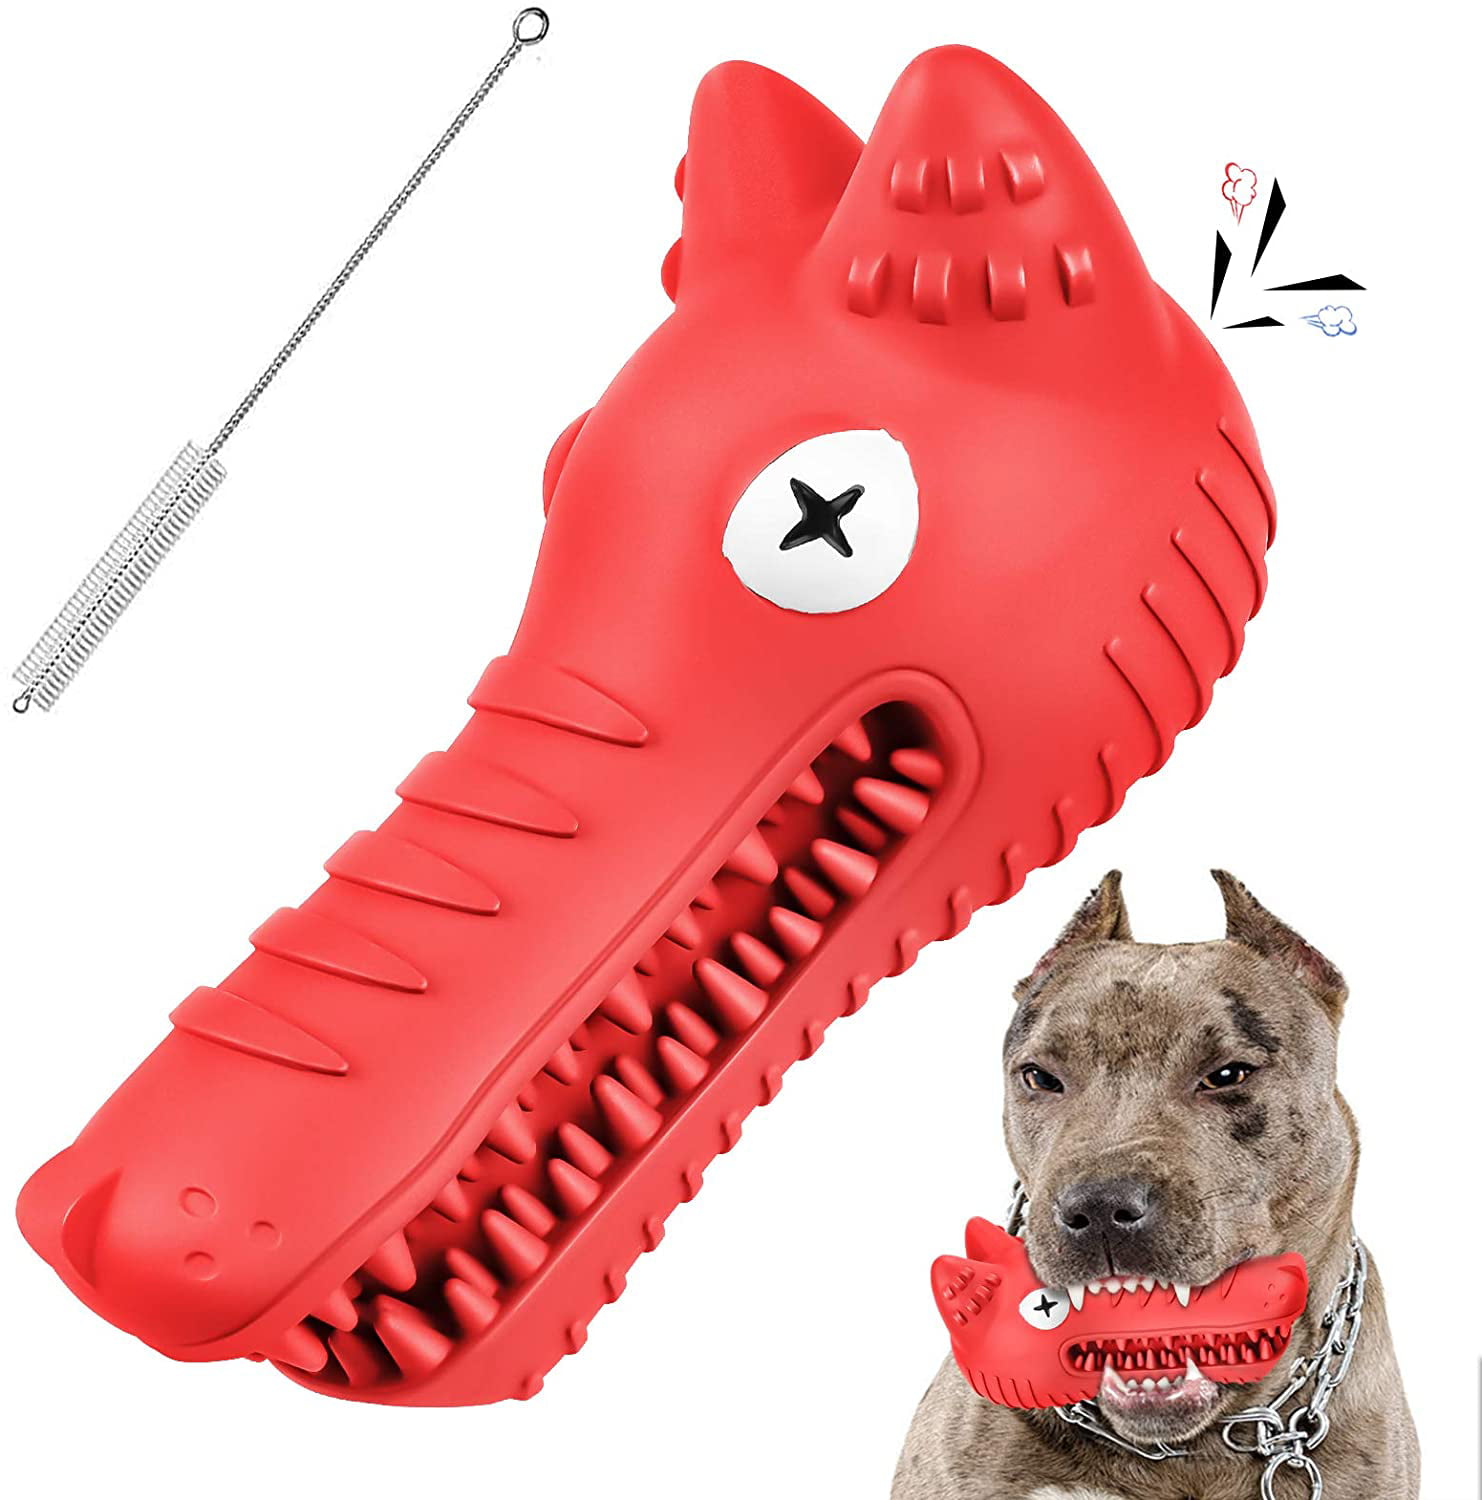 Green Interactive Dog Toys for Large/Medium Dog Indestructible Durable Rubber Dog Toys for Aggressive Chewers Dog Chew Toys Dinosaur Tough Toys for Training and Cleaning Teeth